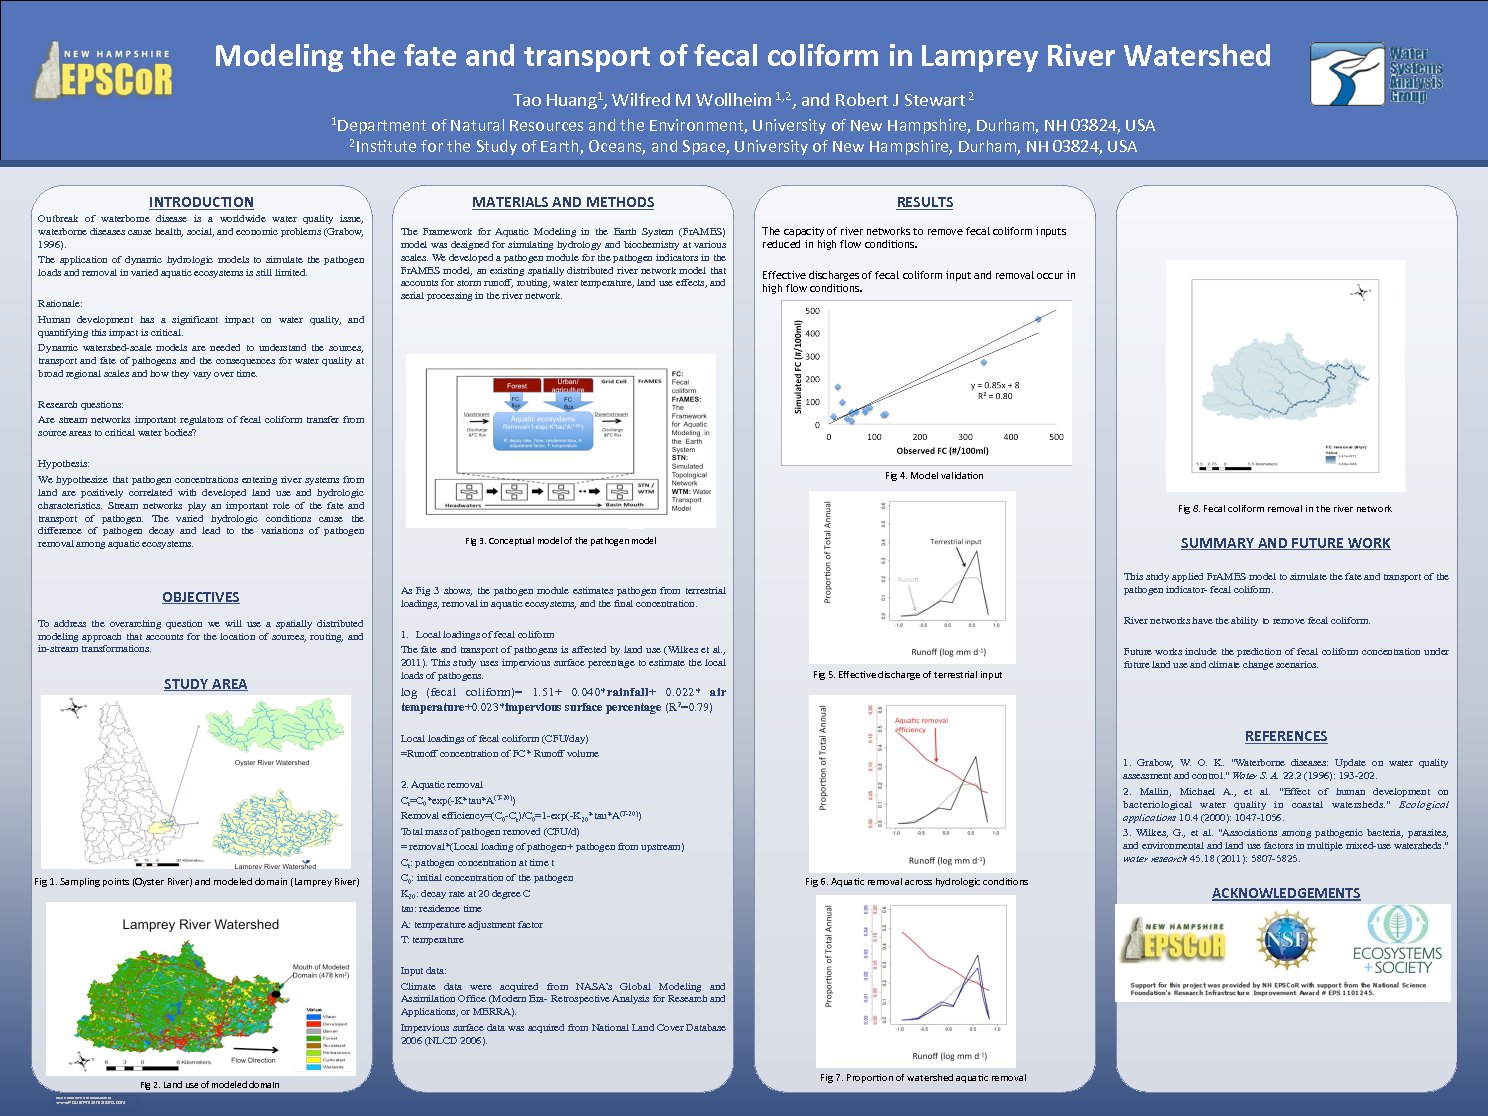 Modeling The Fate And Transport Of Fecal Coliform In Lamprey River Watershed by tao_1988